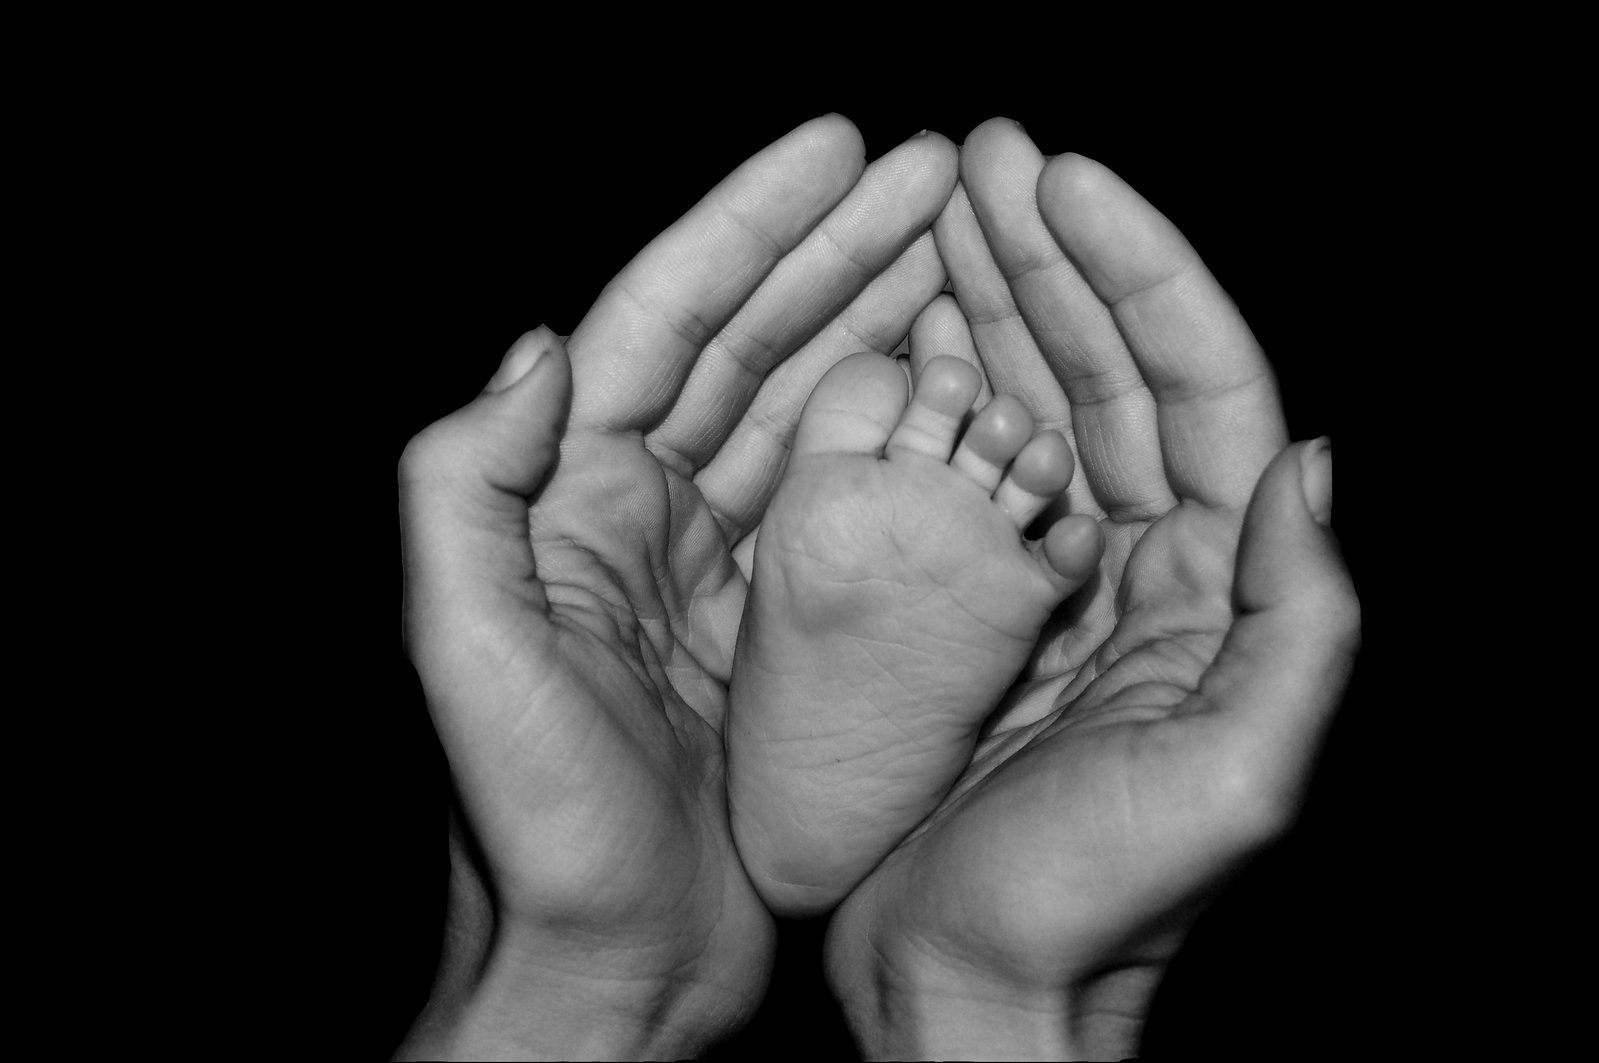 the black and white image shows two hands holding a baby's foot